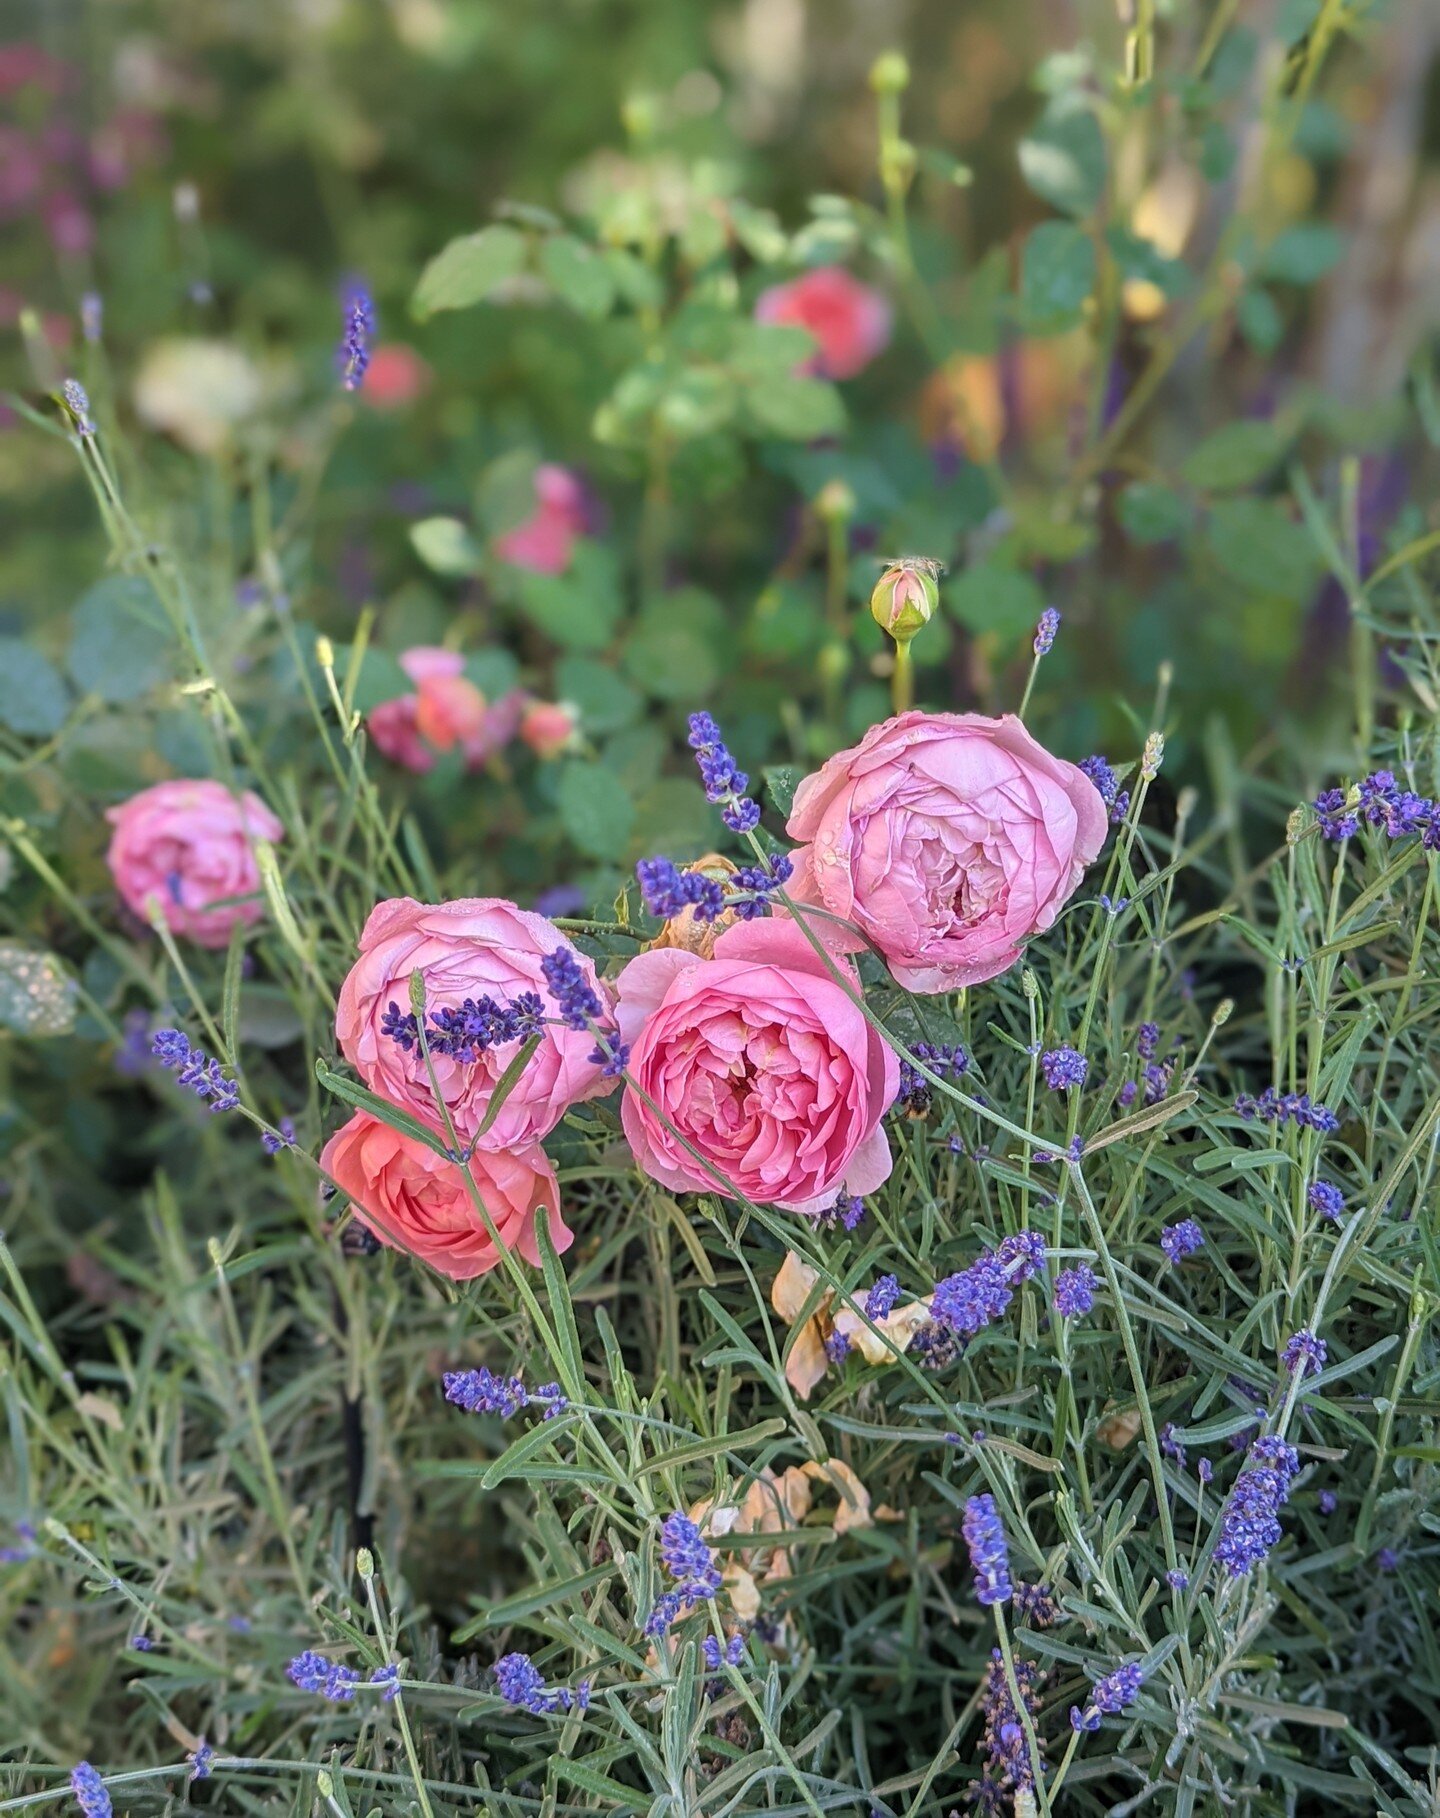 Flowers to make you smile!🌸

The blooms of a recently planted garden cheered us up on our site visit.

If you like pink and purple tones, the combination of roses and lavender may be a good choice.

Creating the right colour combination of plants is